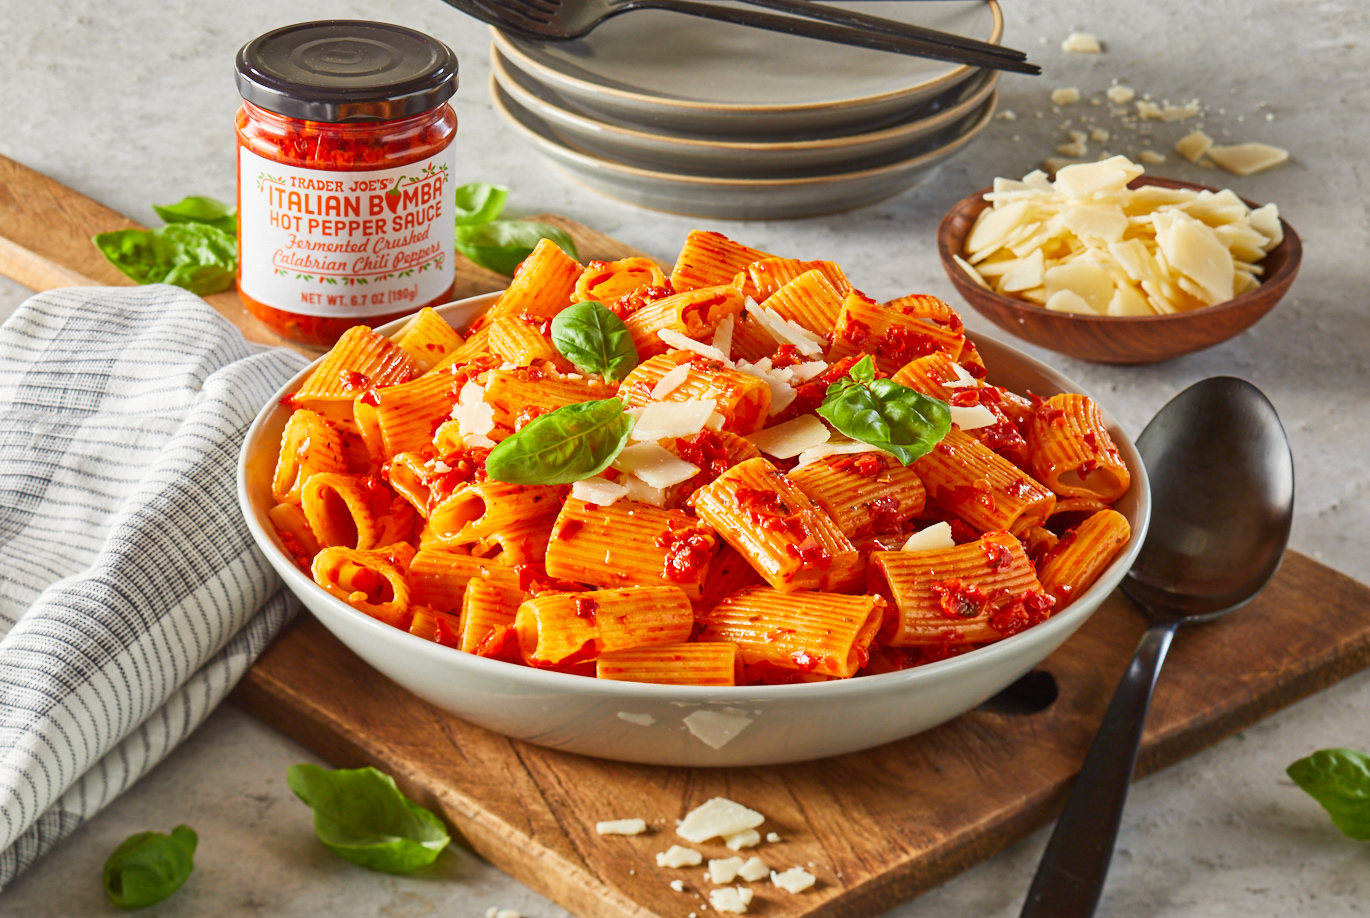 Trader Joe's Italian Bomba Hot Pepper Sauce; shown tossed with rigatoni pasta and garnished with shaved Parmesan Reggiano and fresh basil leaves